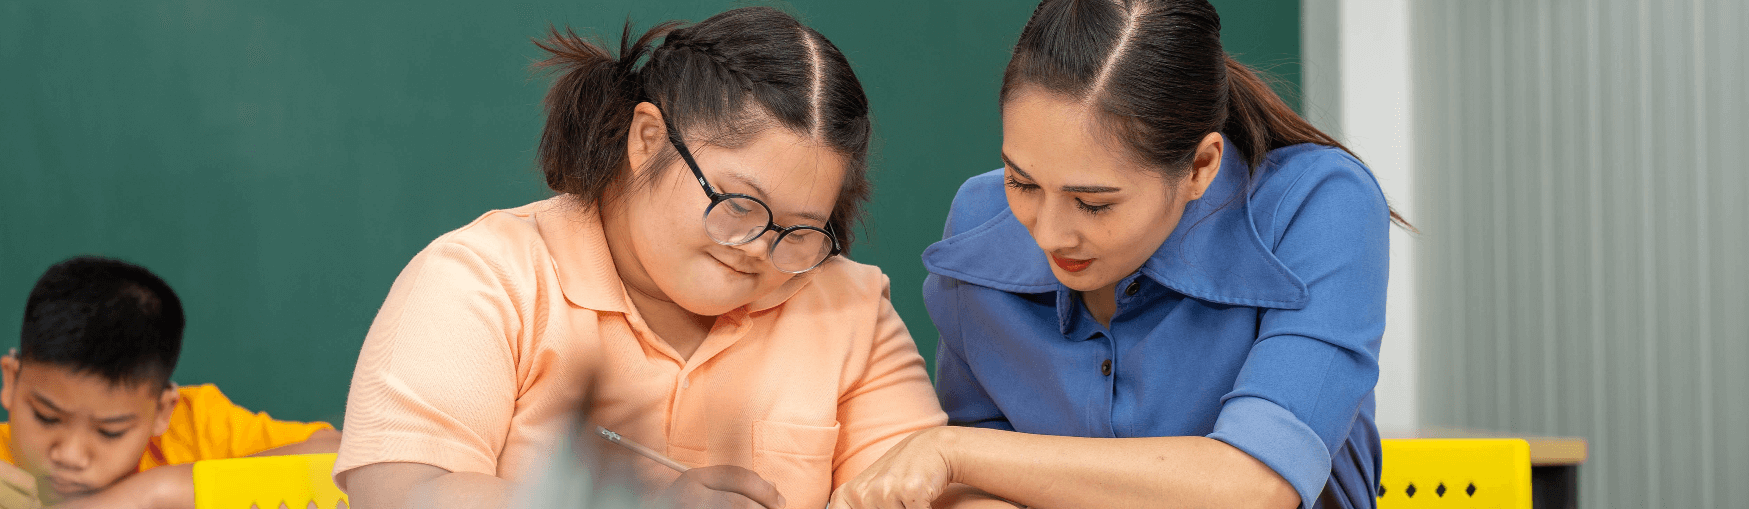 Girl with glasses getting help from female teacher